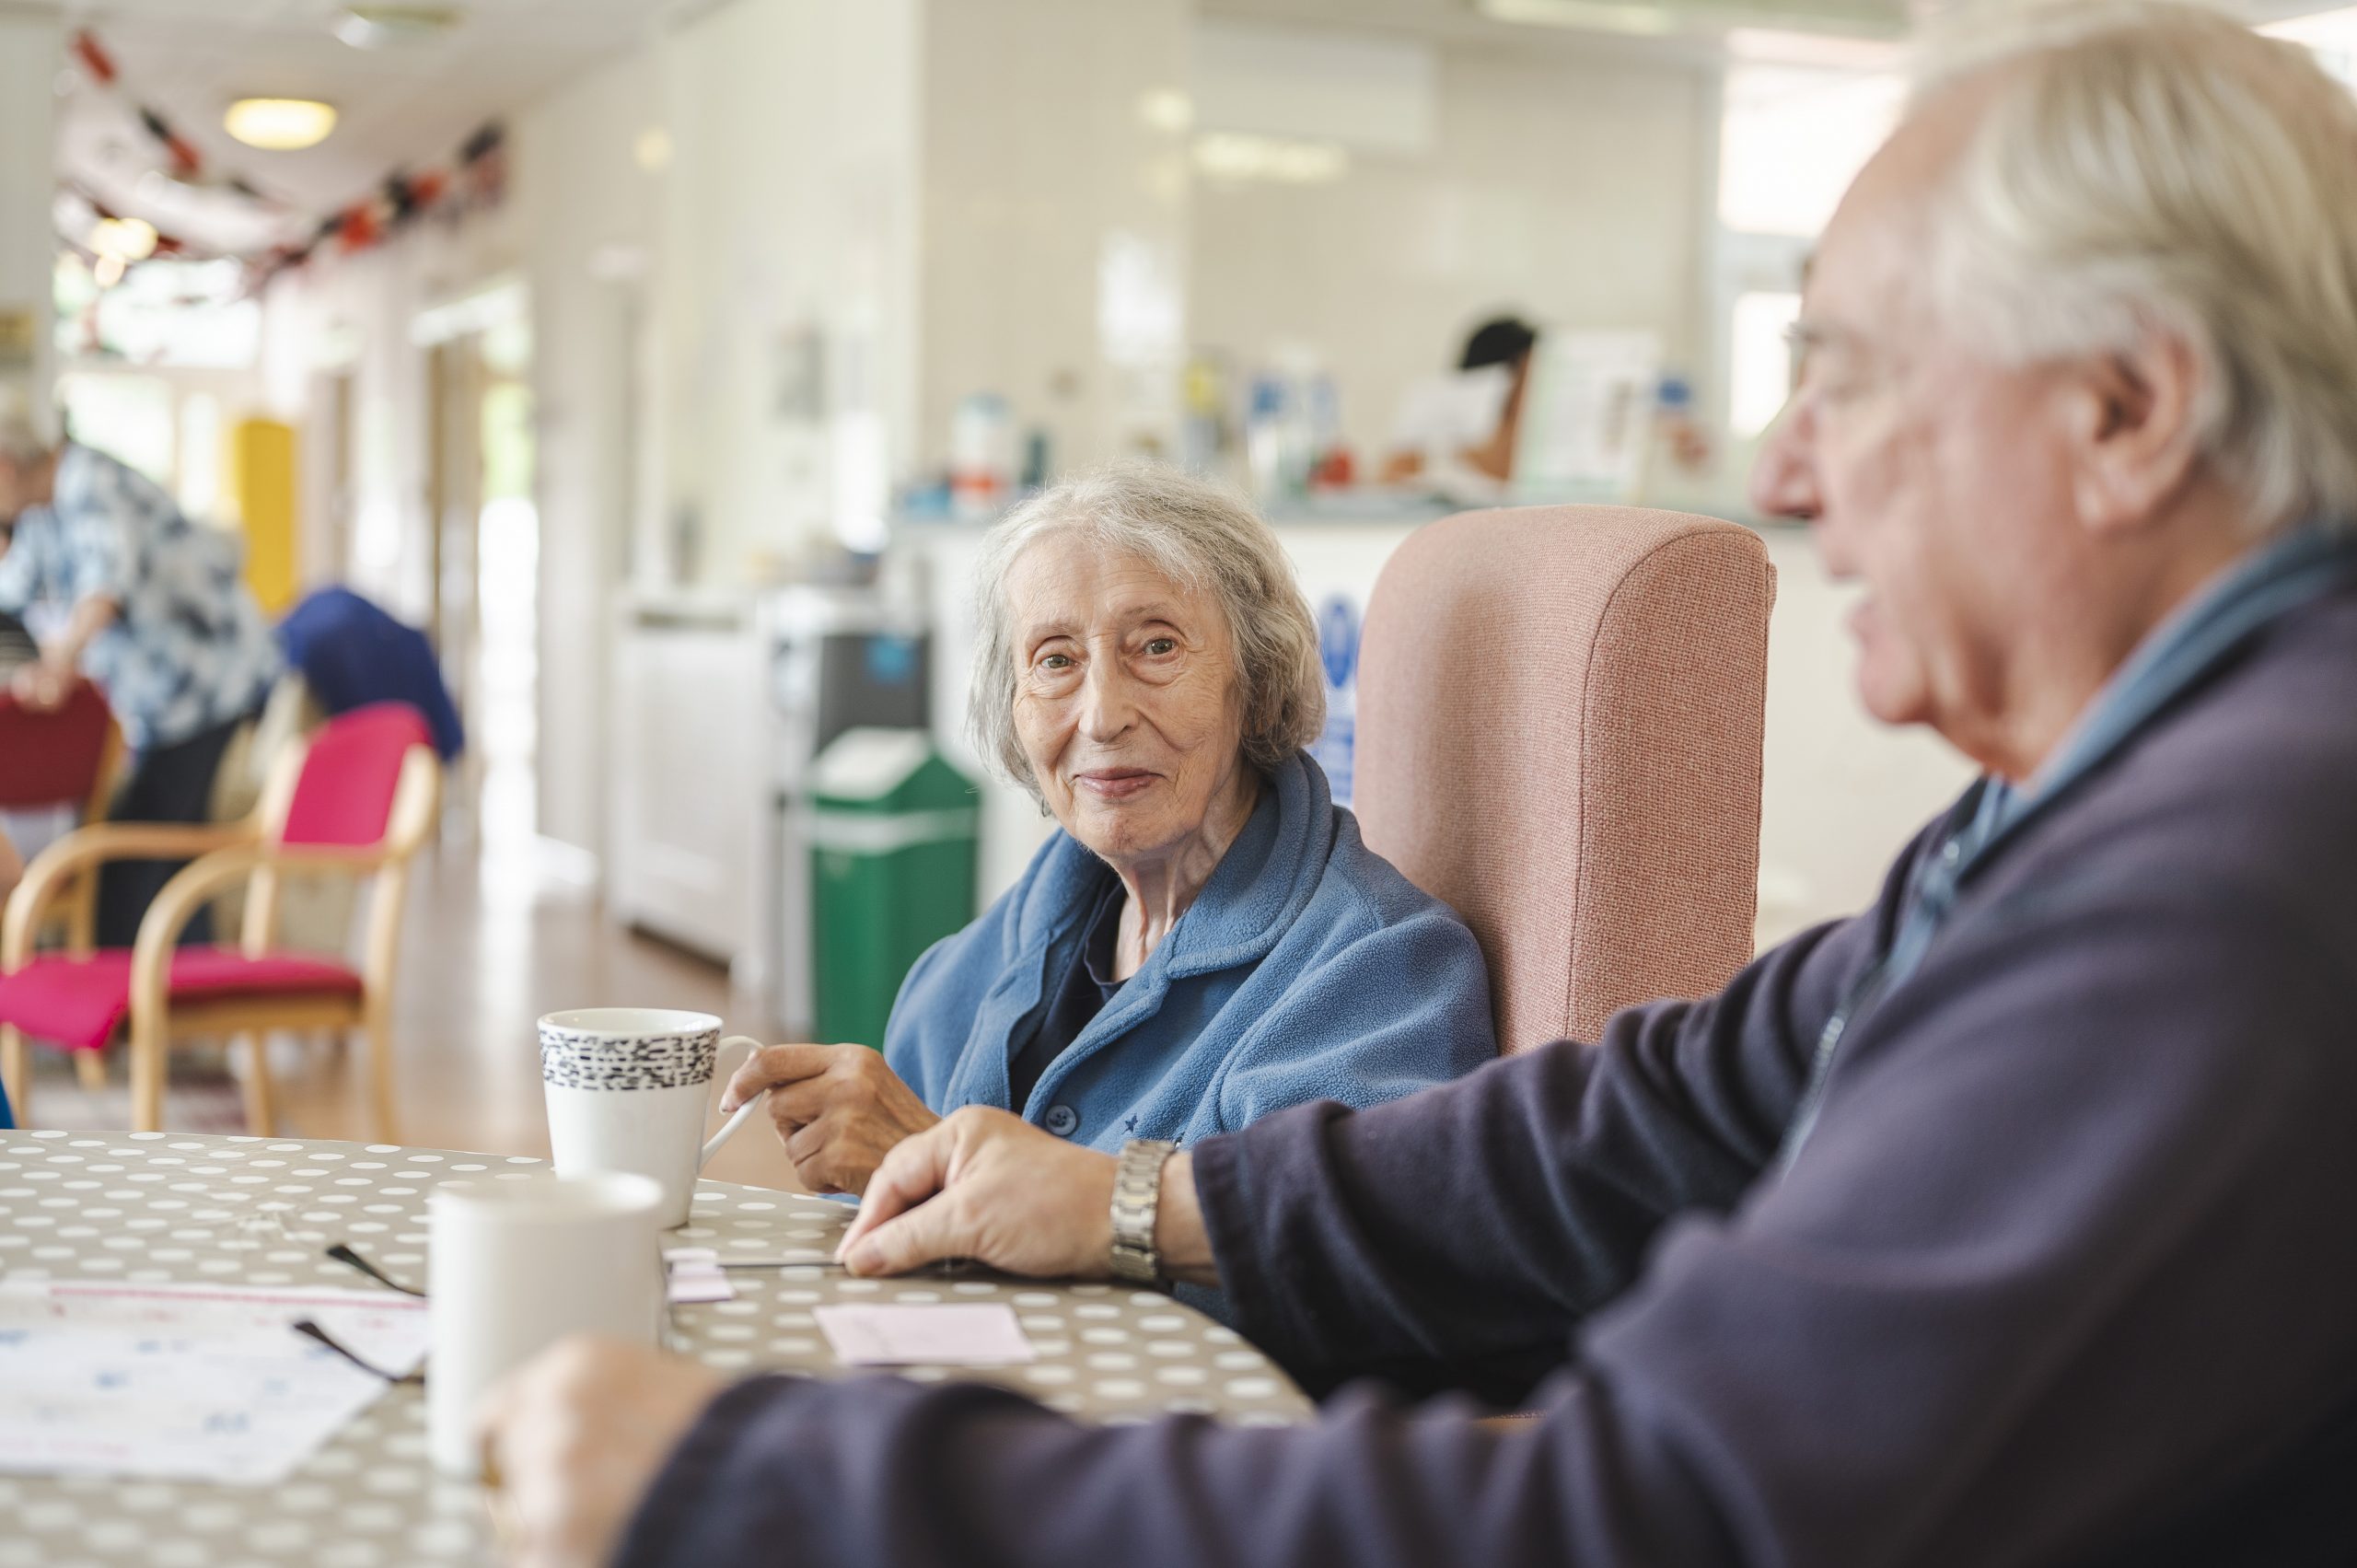 “Yes, it IS time to act,” says Social Care Future in response to ADASS report